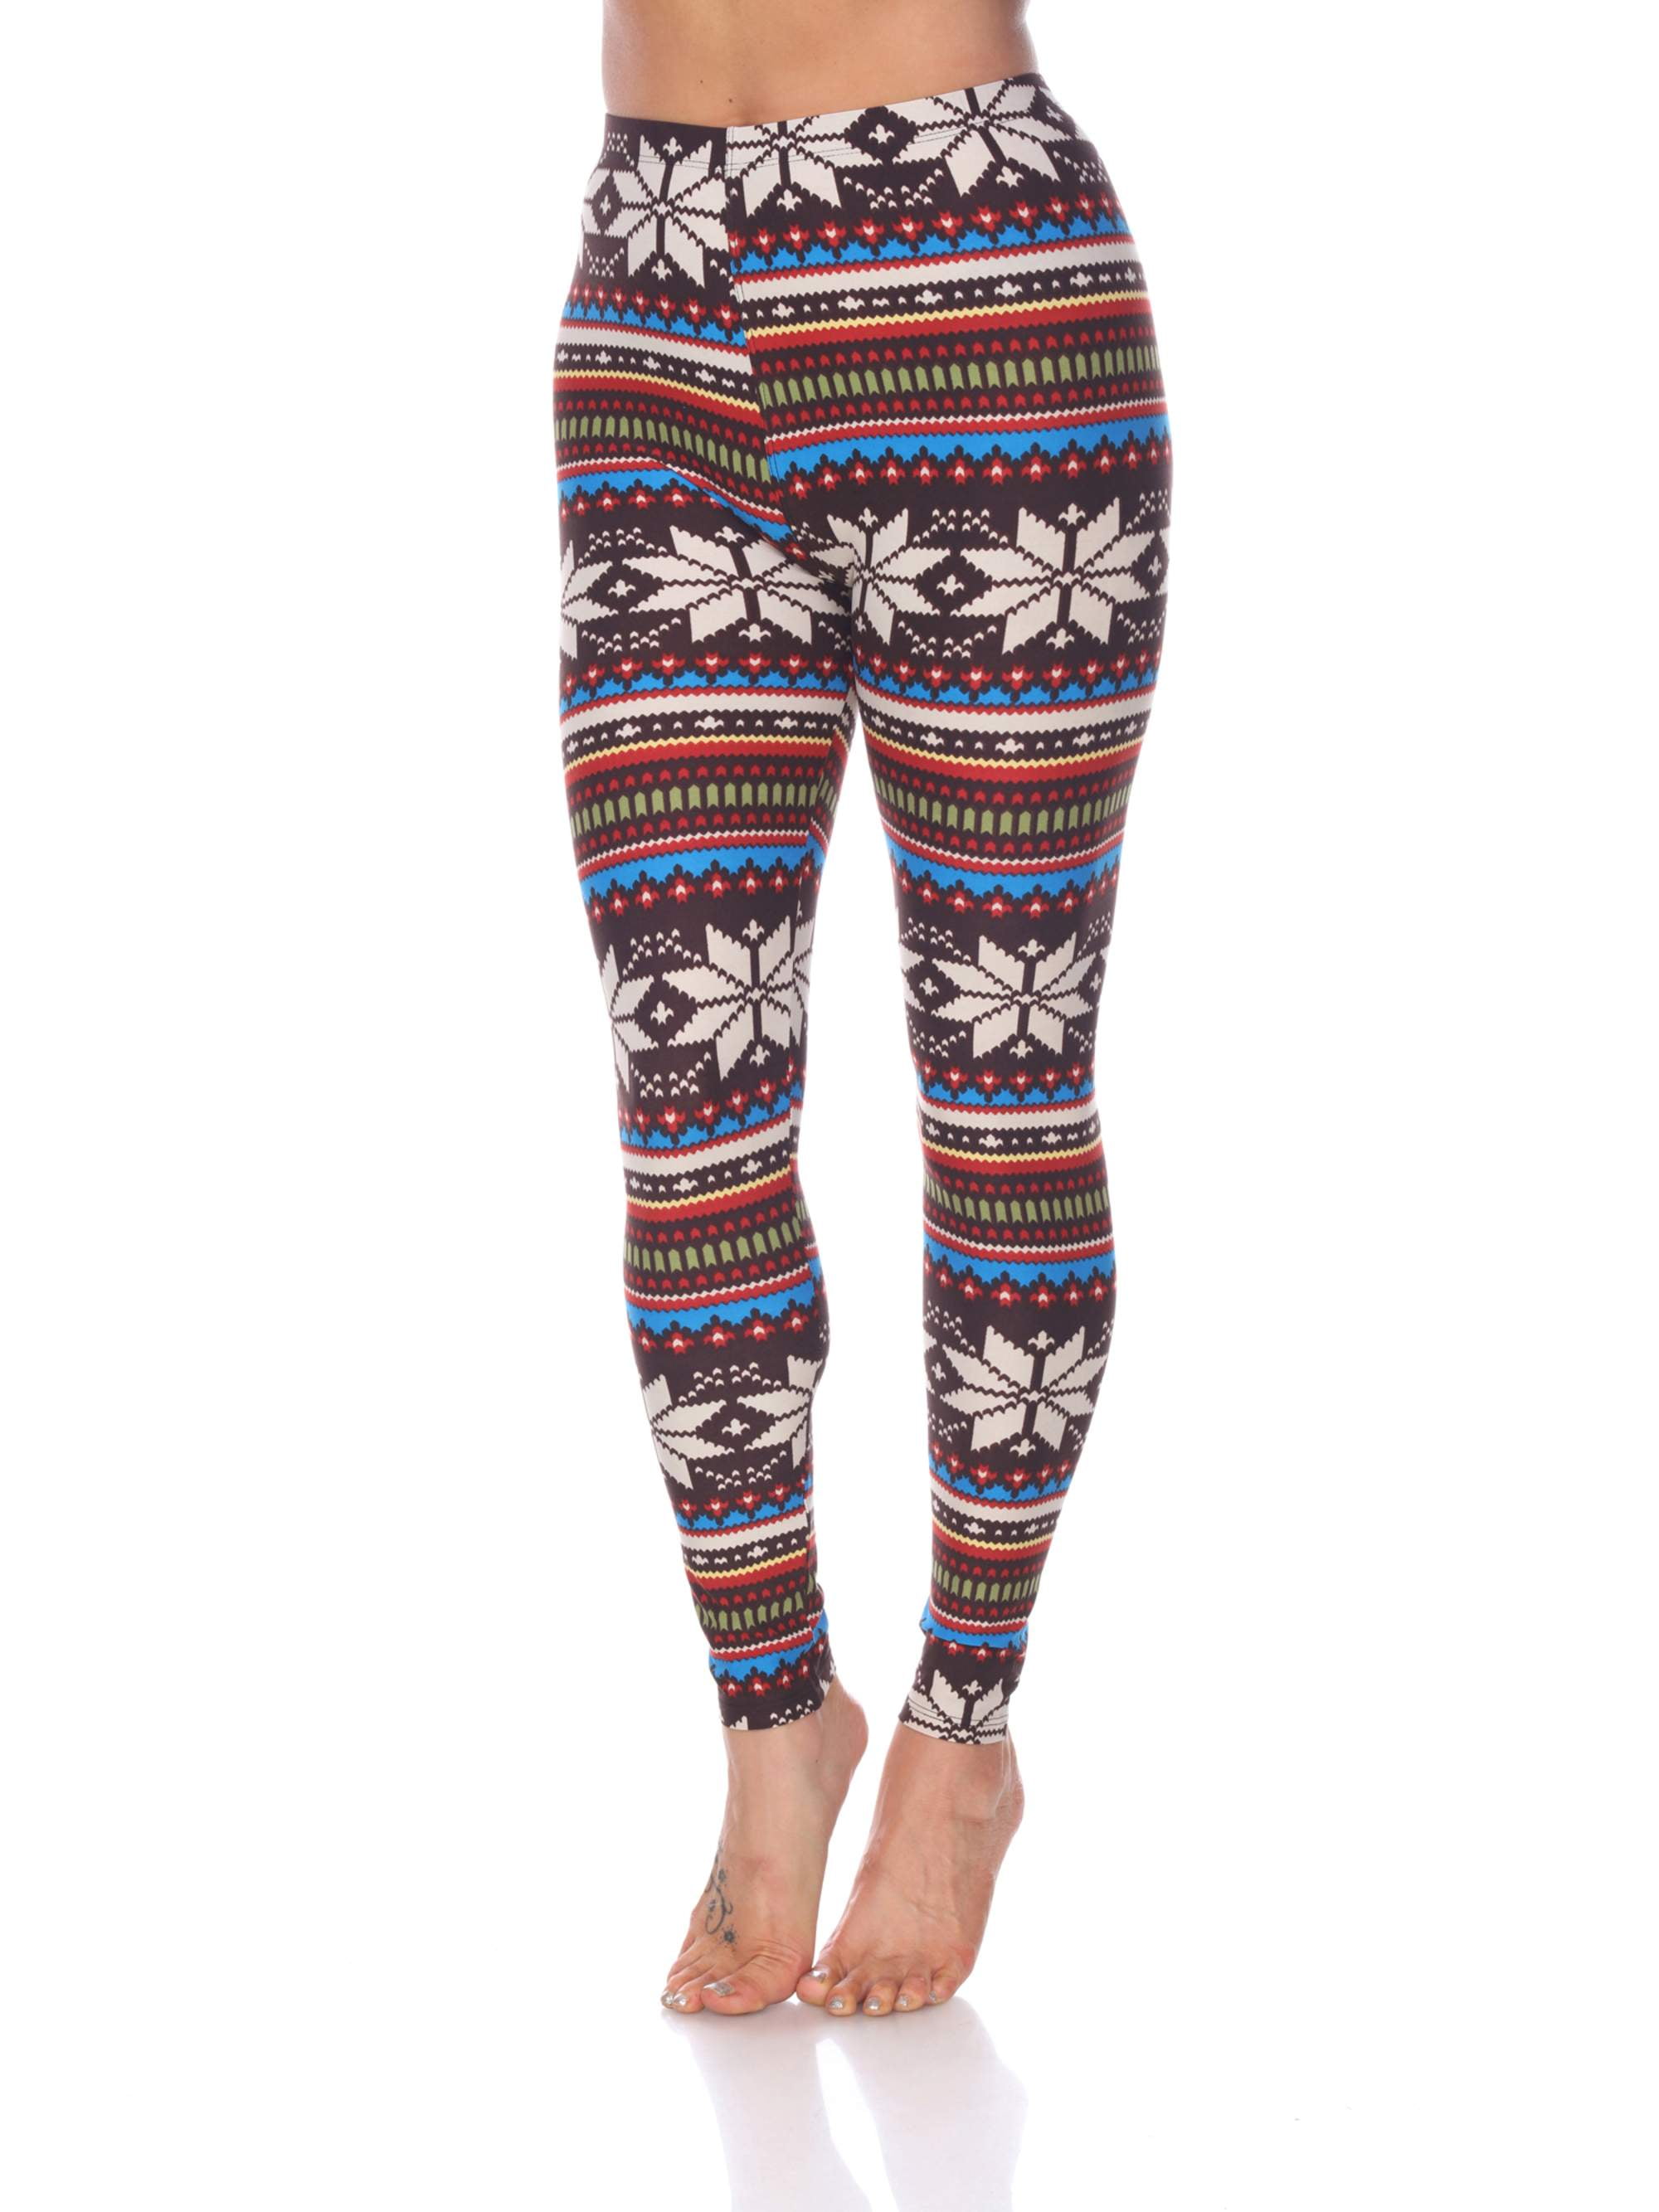 Chic Women's Geometrical Christmas Pattern Leggings  Christmas leggings,  Aztec leggings, Matching family outfits